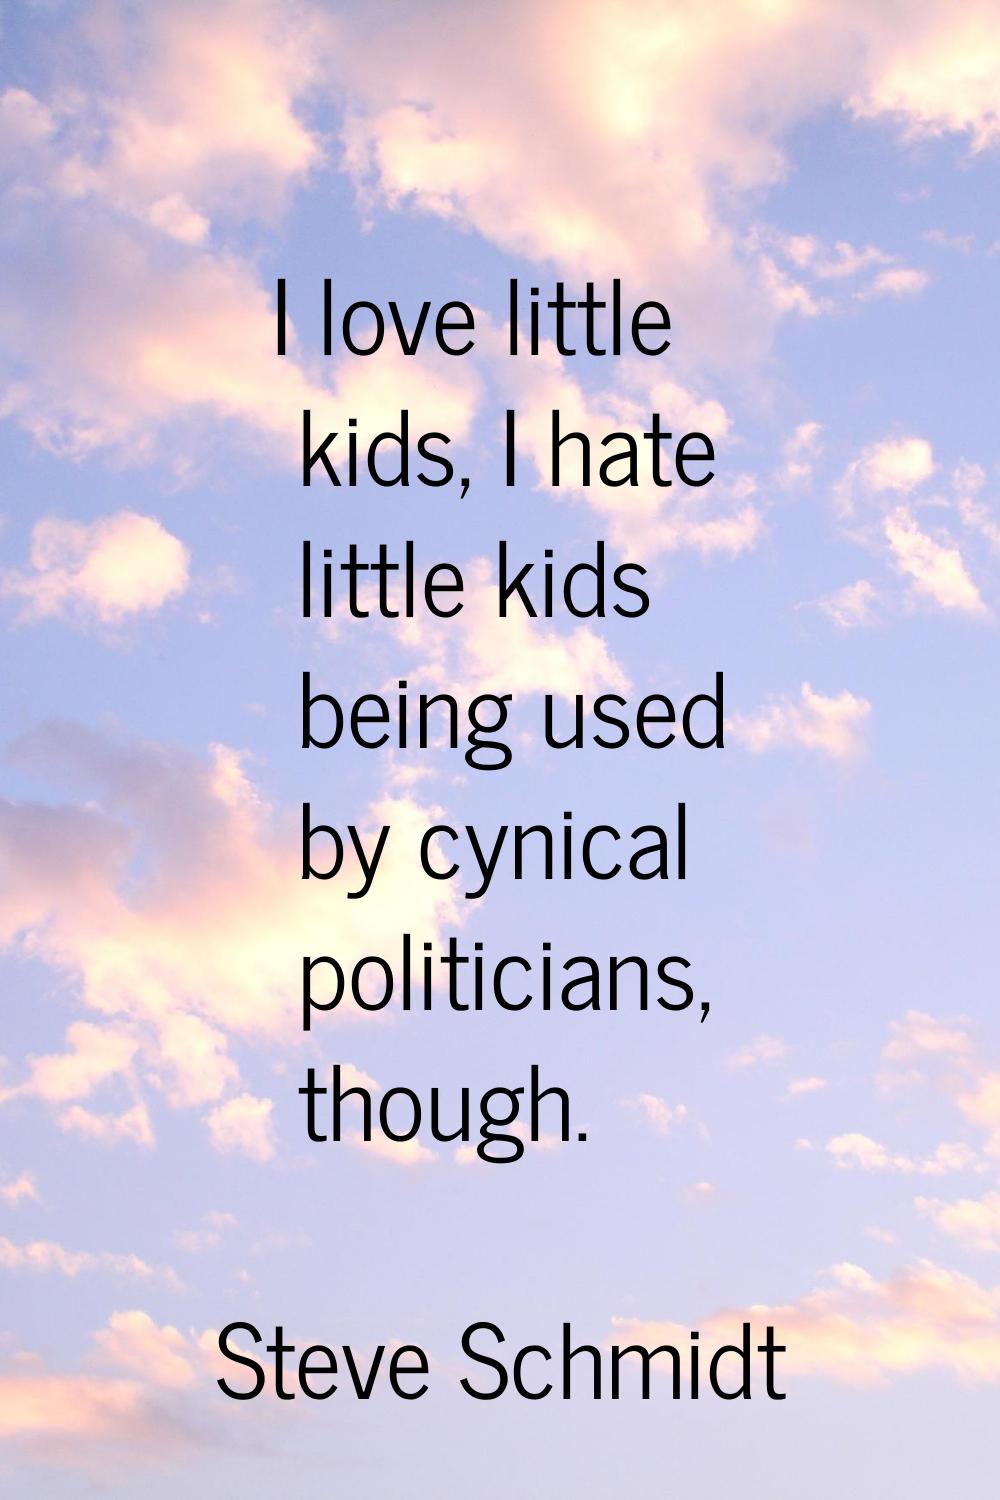 I love little kids, I hate little kids being used by cynical politicians, though.